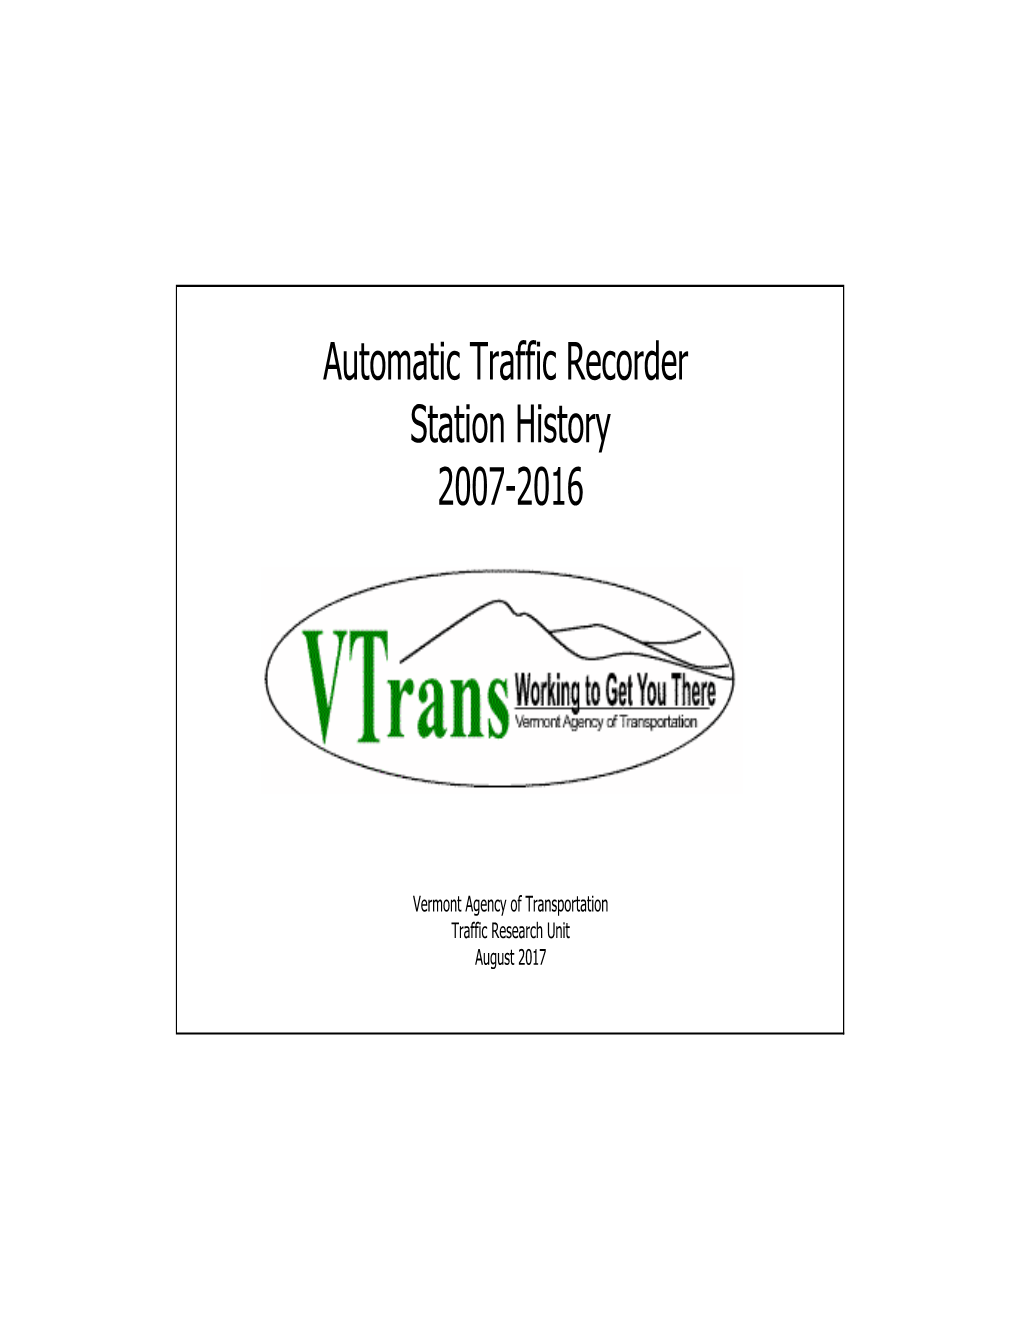 Automatic Traffic Recorder Station History 2007-2016